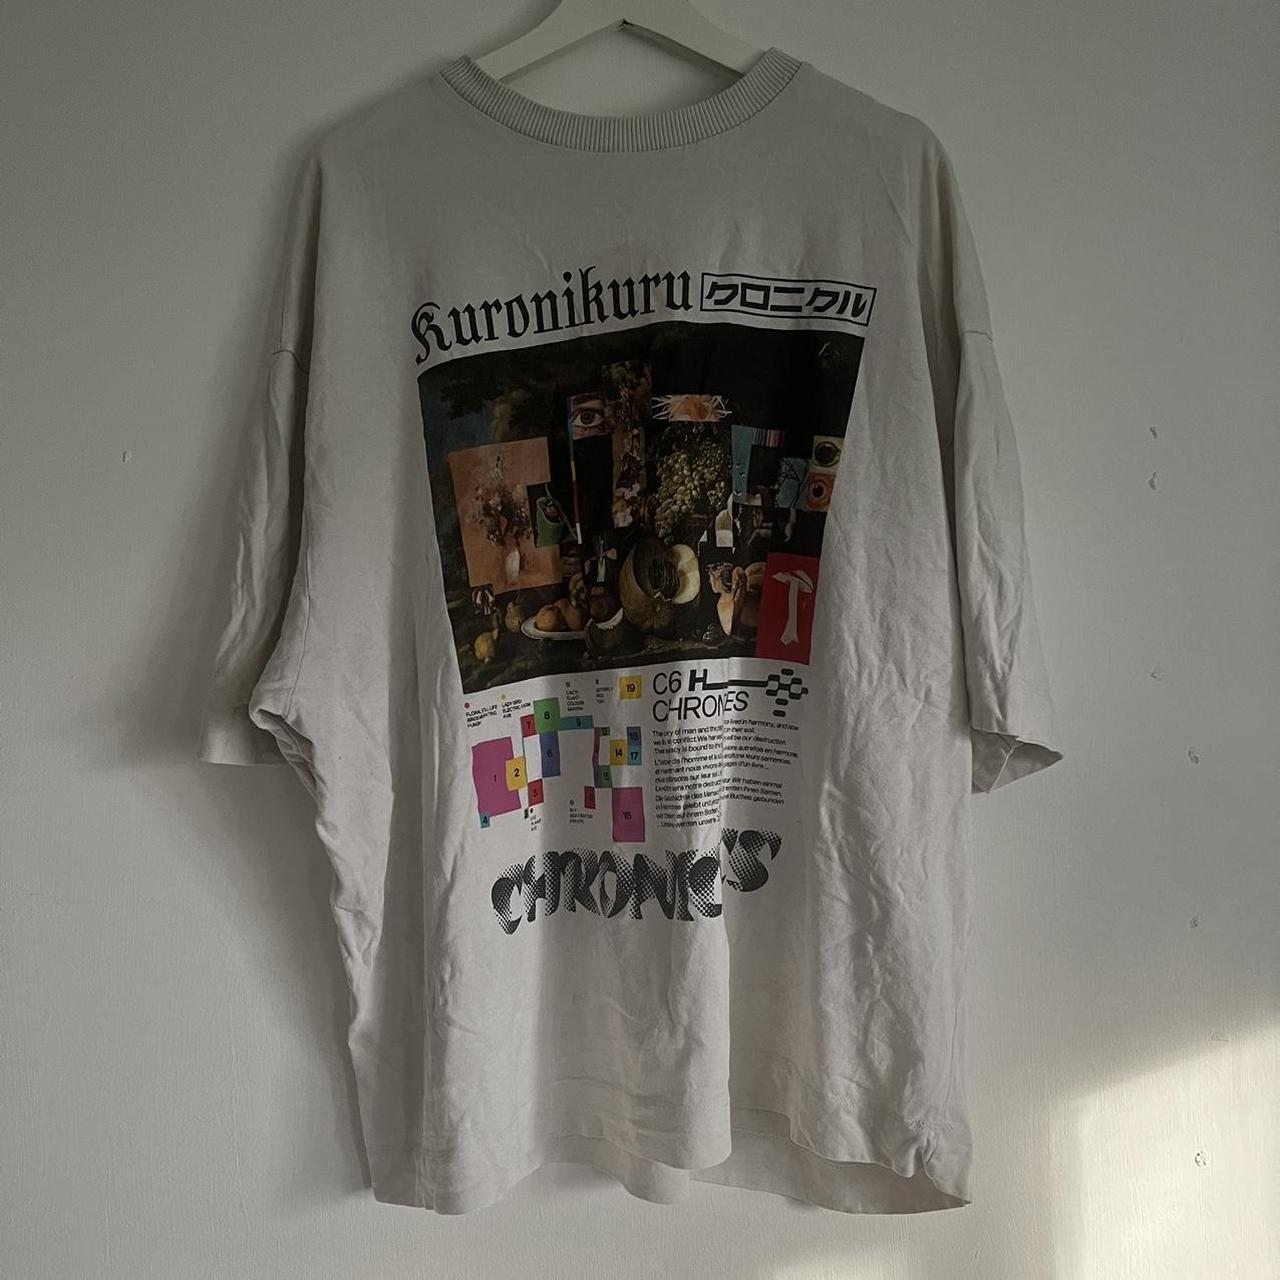 Collusion oversized t shirt Good quality Size:uk14 - Depop